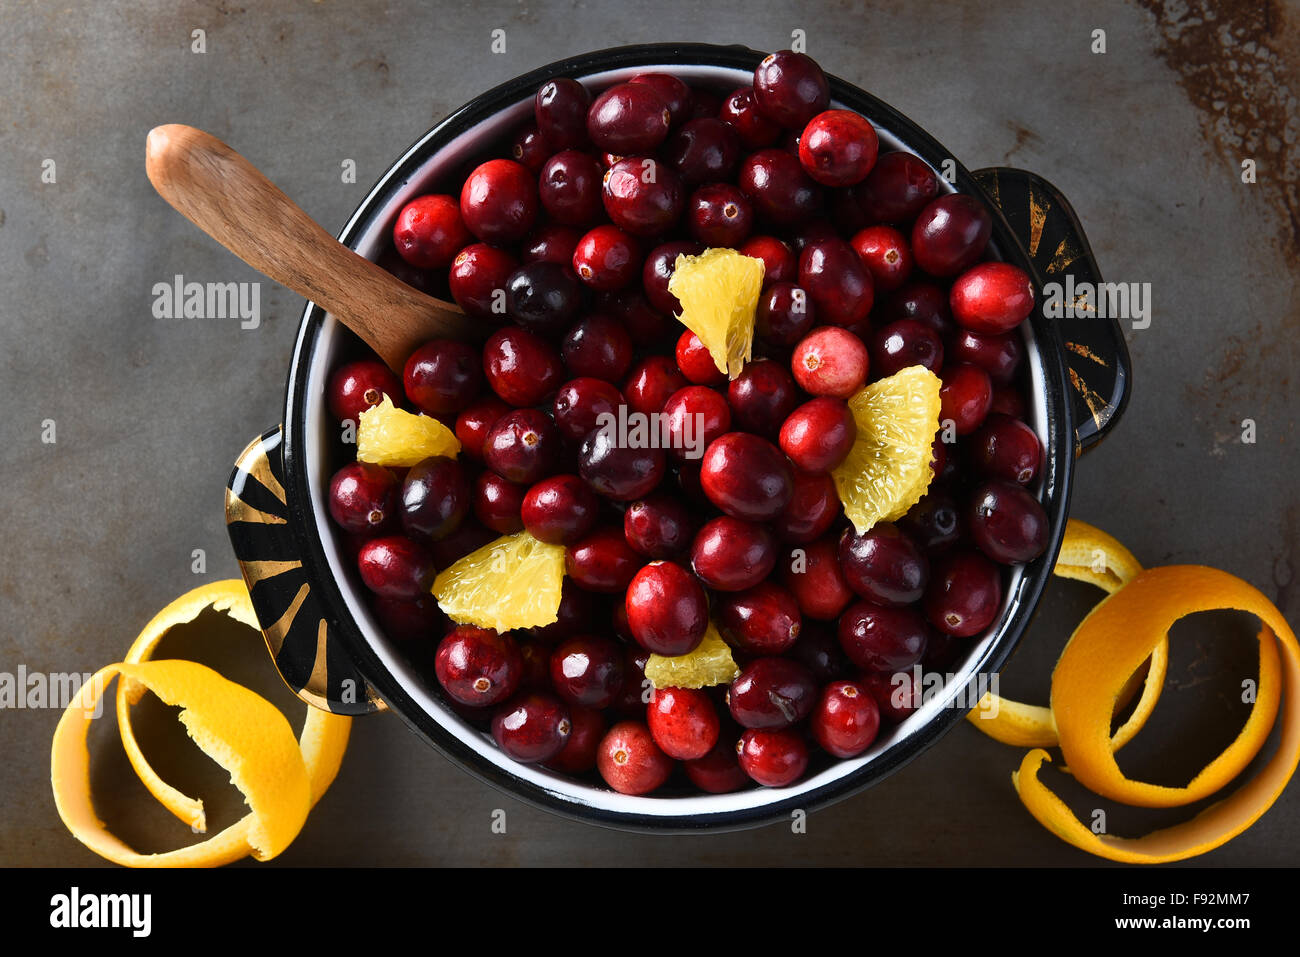 A pot full of fresh cranberries and orange pieces,. High angle view of the traditional Thanksgiving holiday side dish. Stock Photo